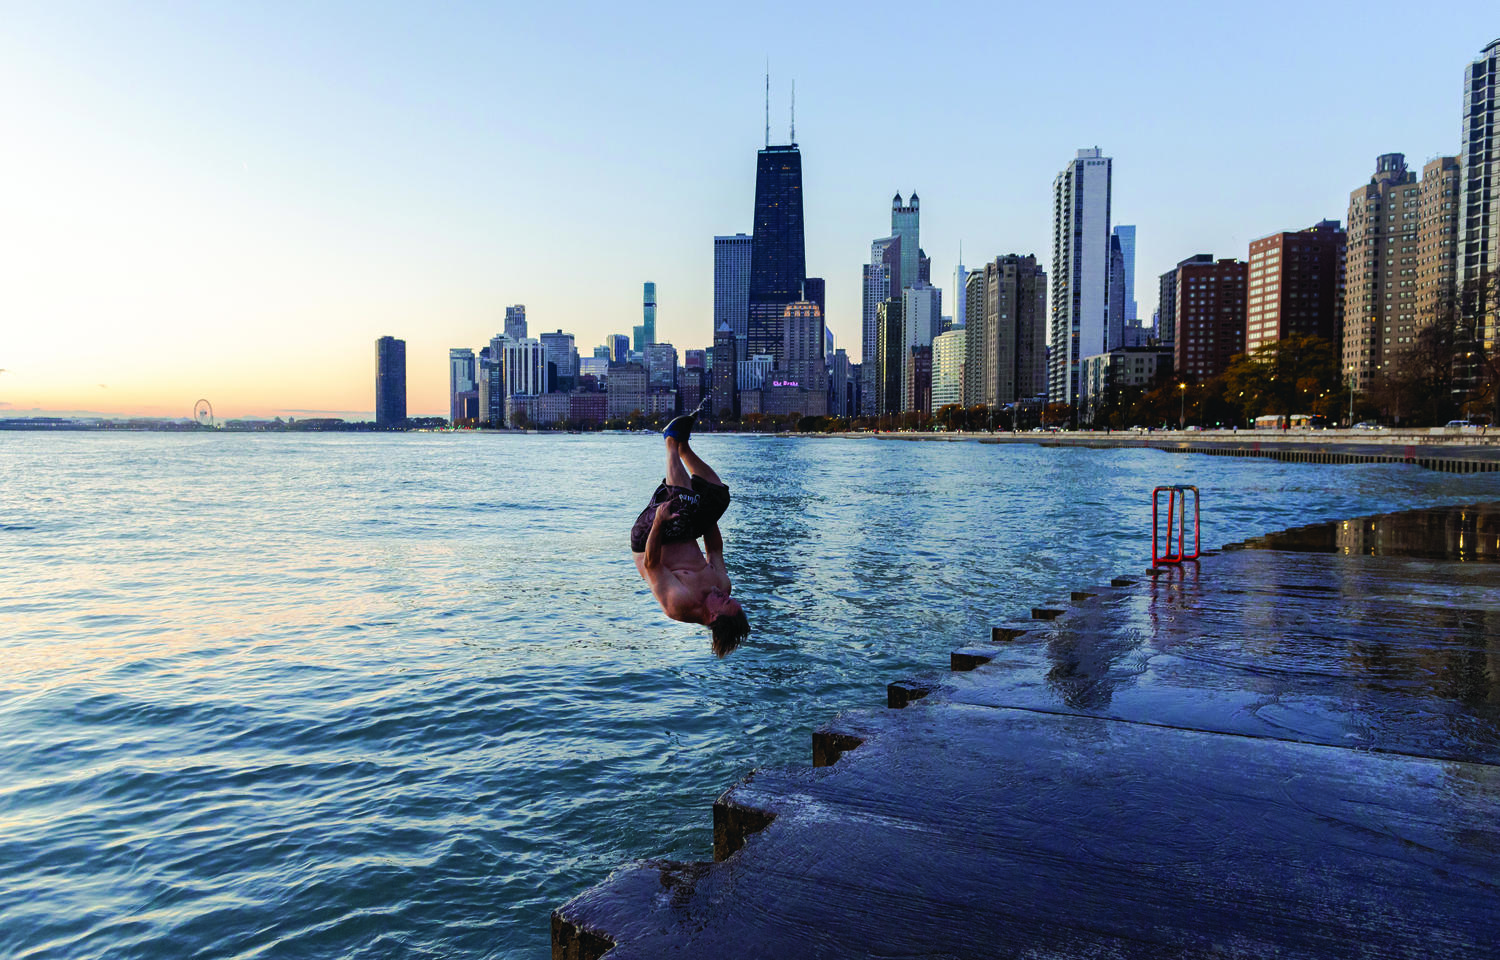 Man in bathing suit jumps into a lake at sunrise